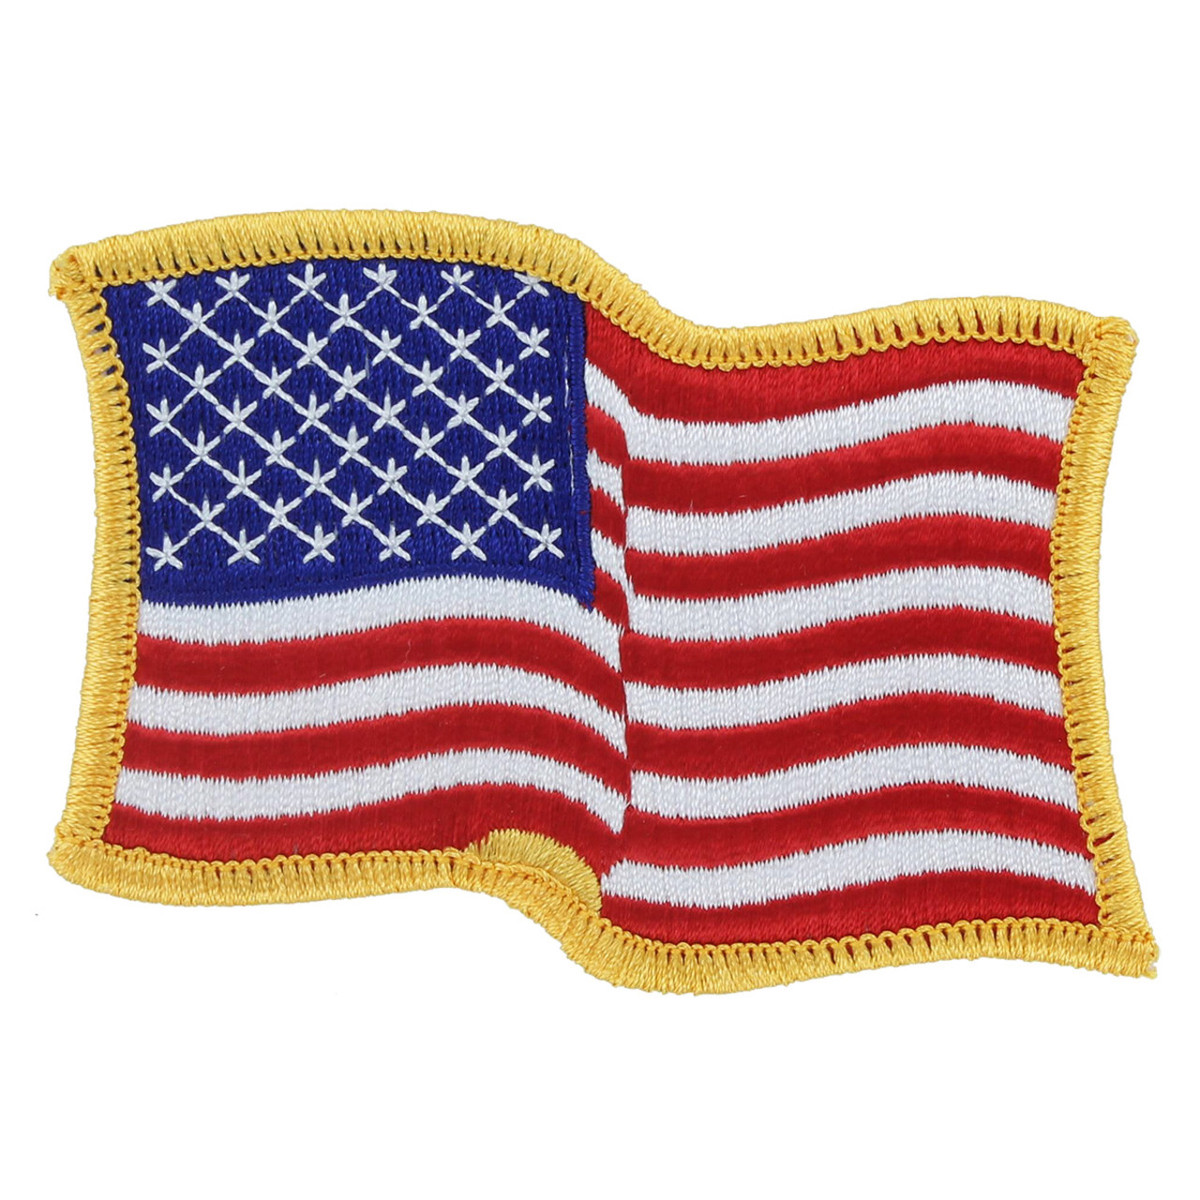 USA-Gold Border Patch